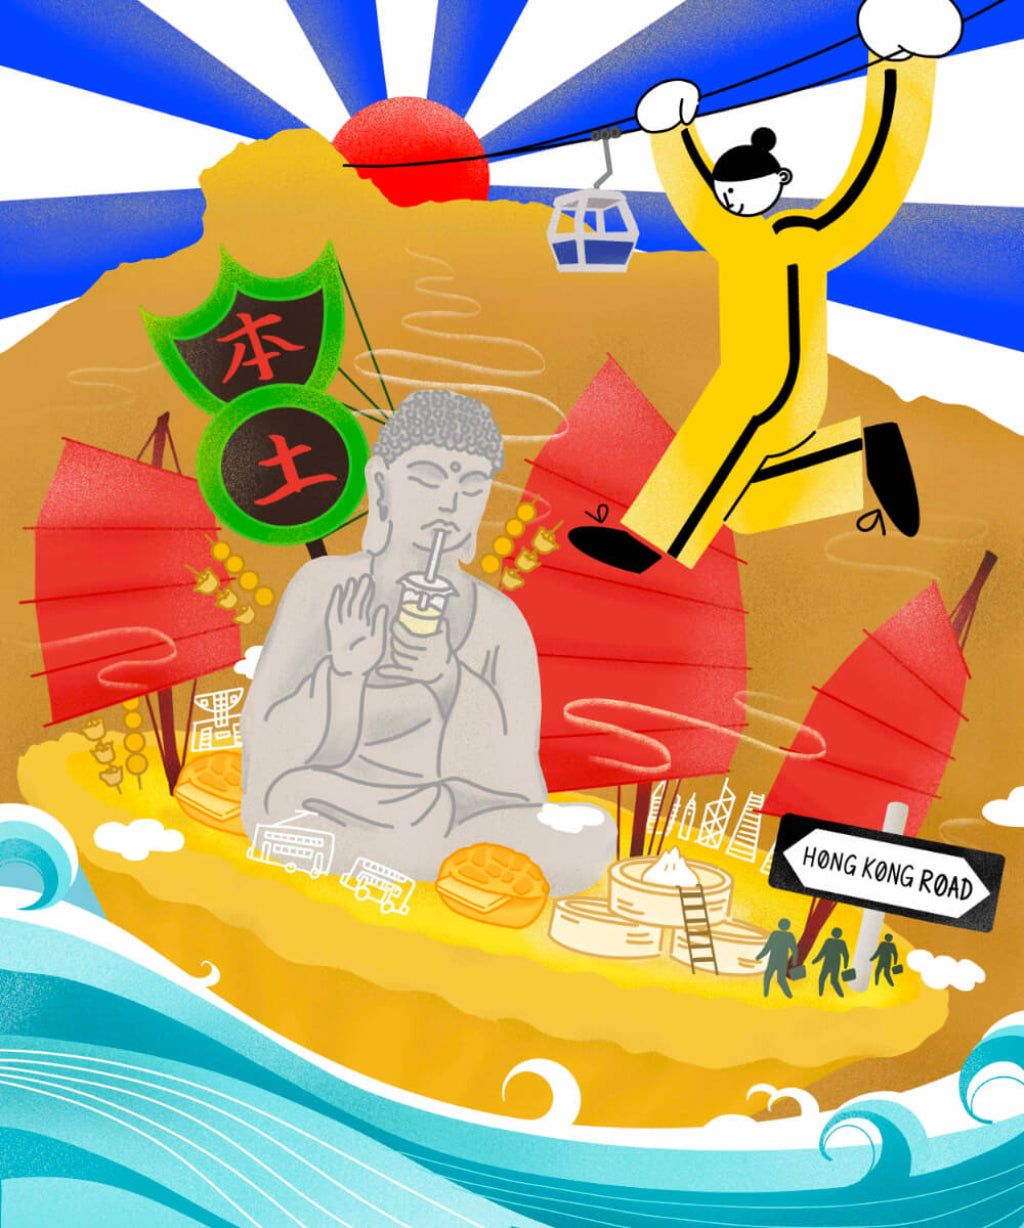 Buddha and boat and HK sign and bruce lee floating on an island above water